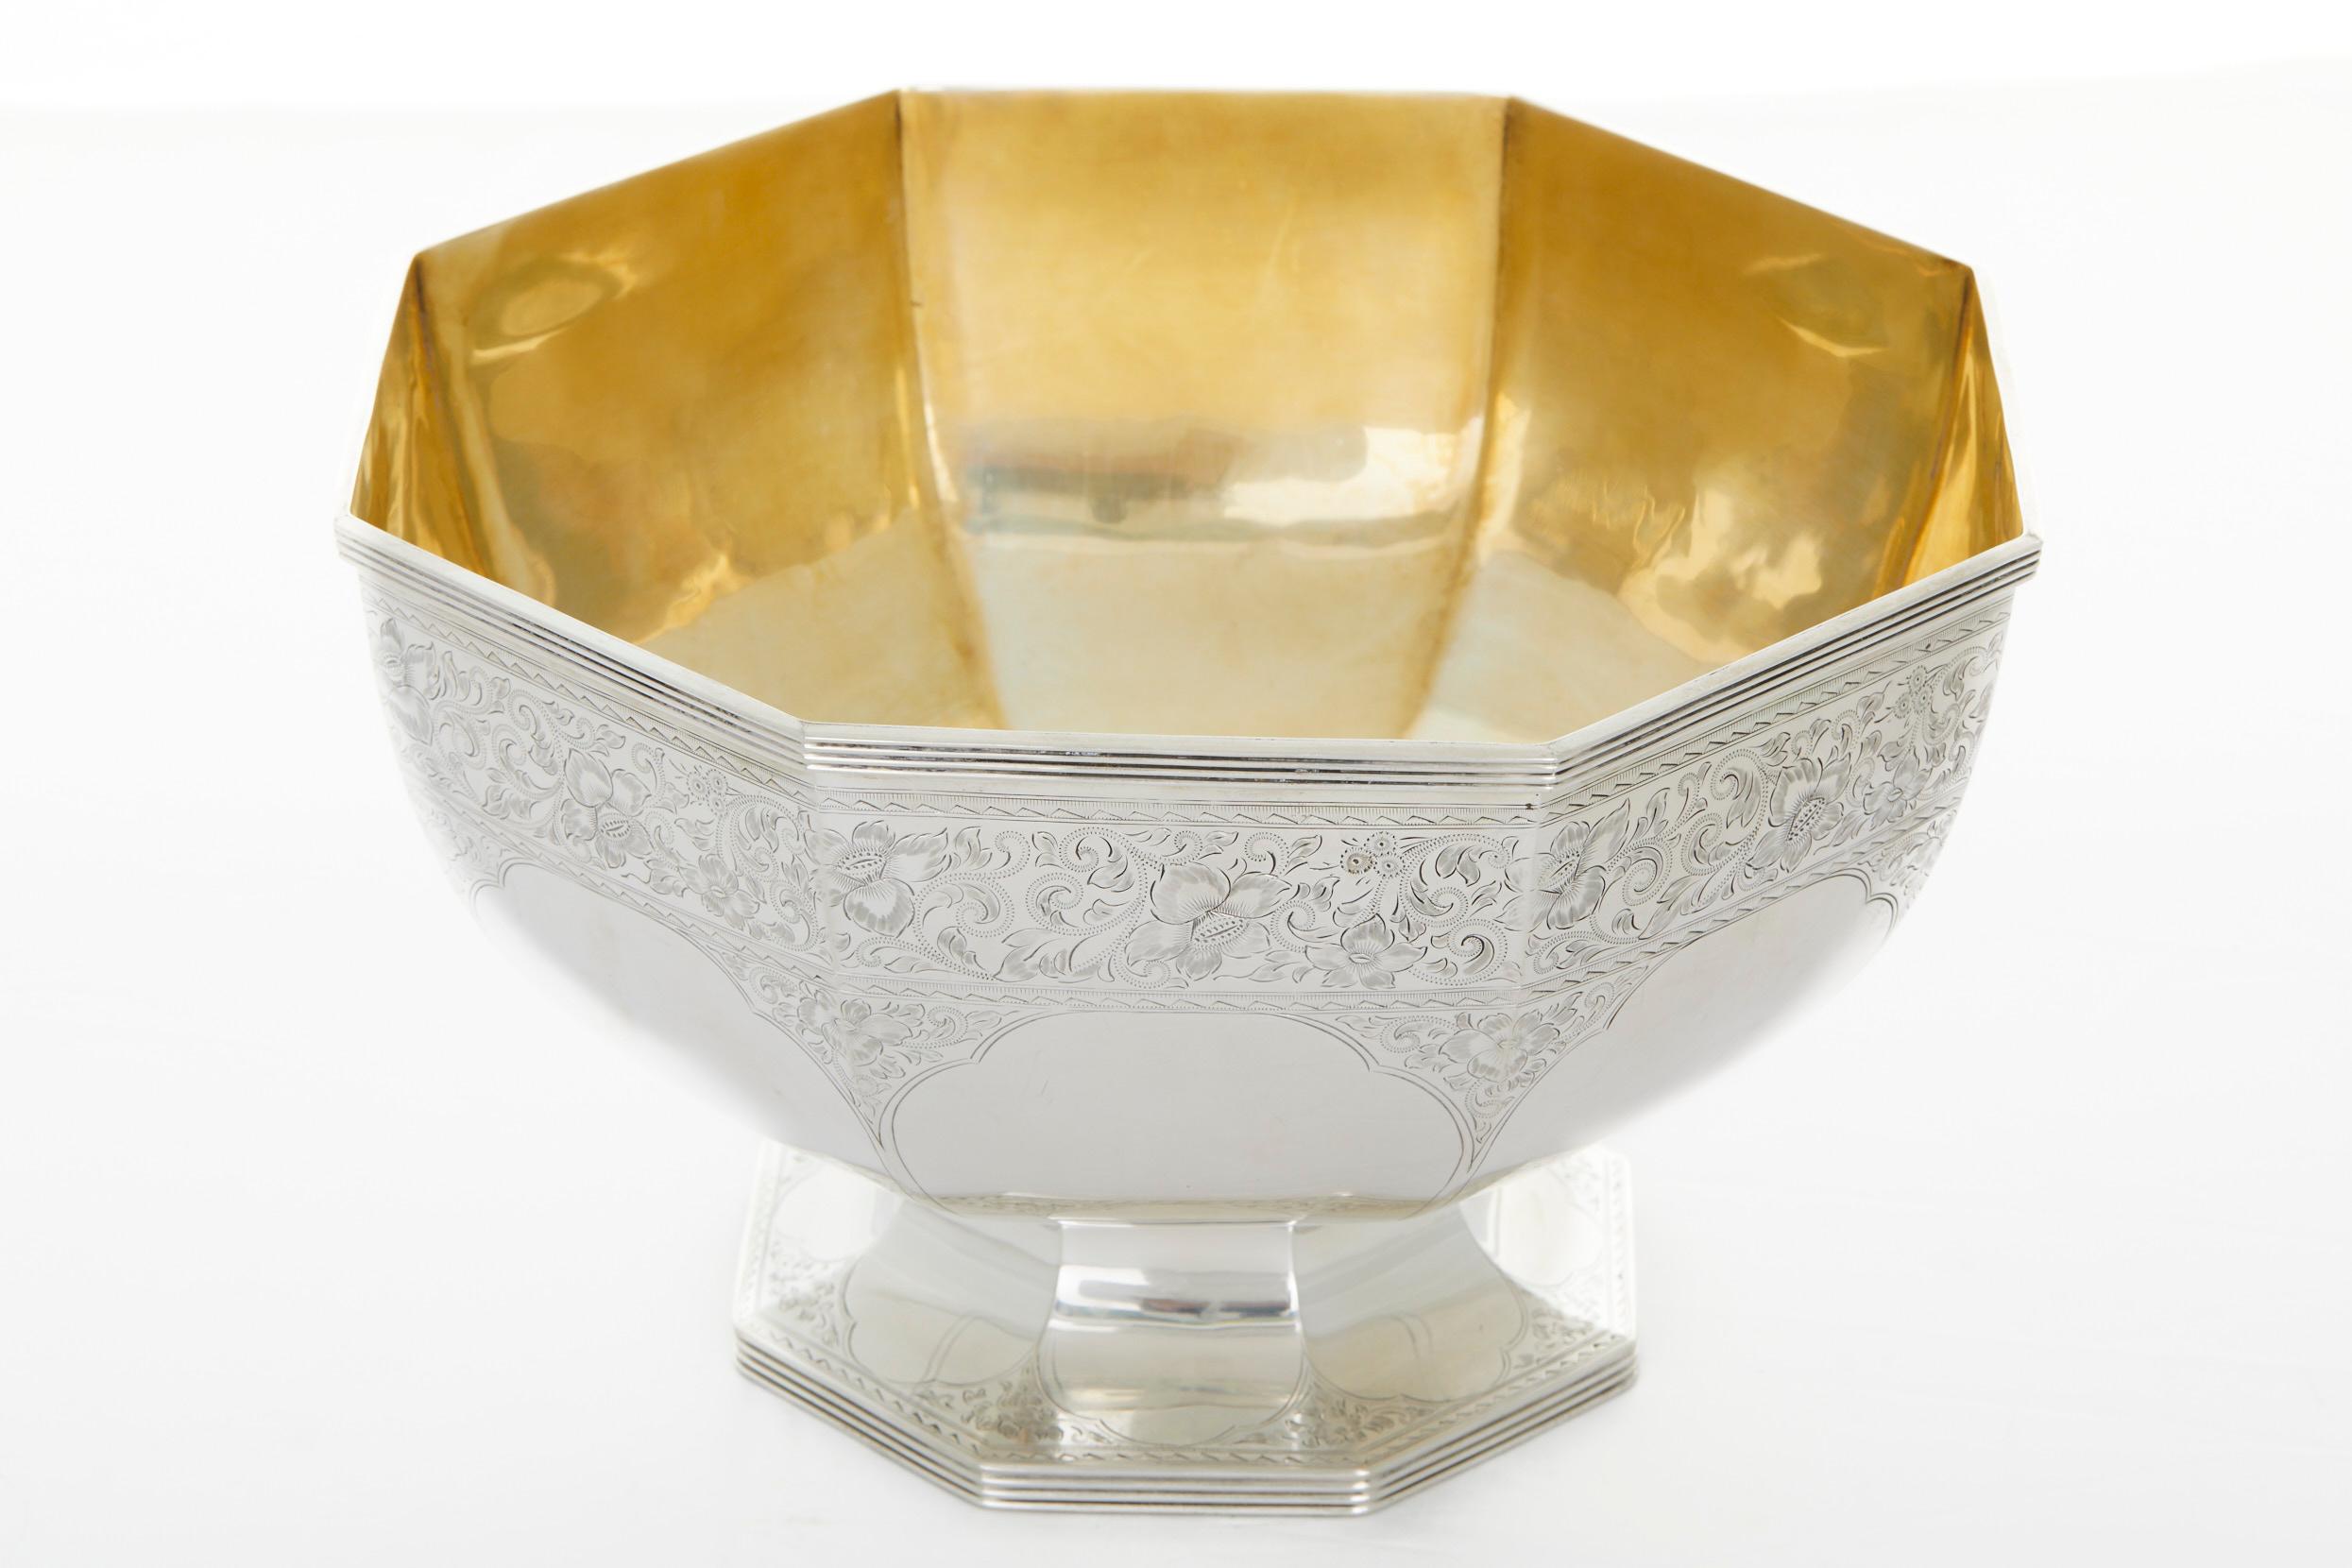 Late 19th century sterling silver footed centerpiece bowl with exterior floral band design details and gold wash interior. The centerpiece bowl is in great antique condition. Minor wear consistent with age / use. Maker's mark and numbered